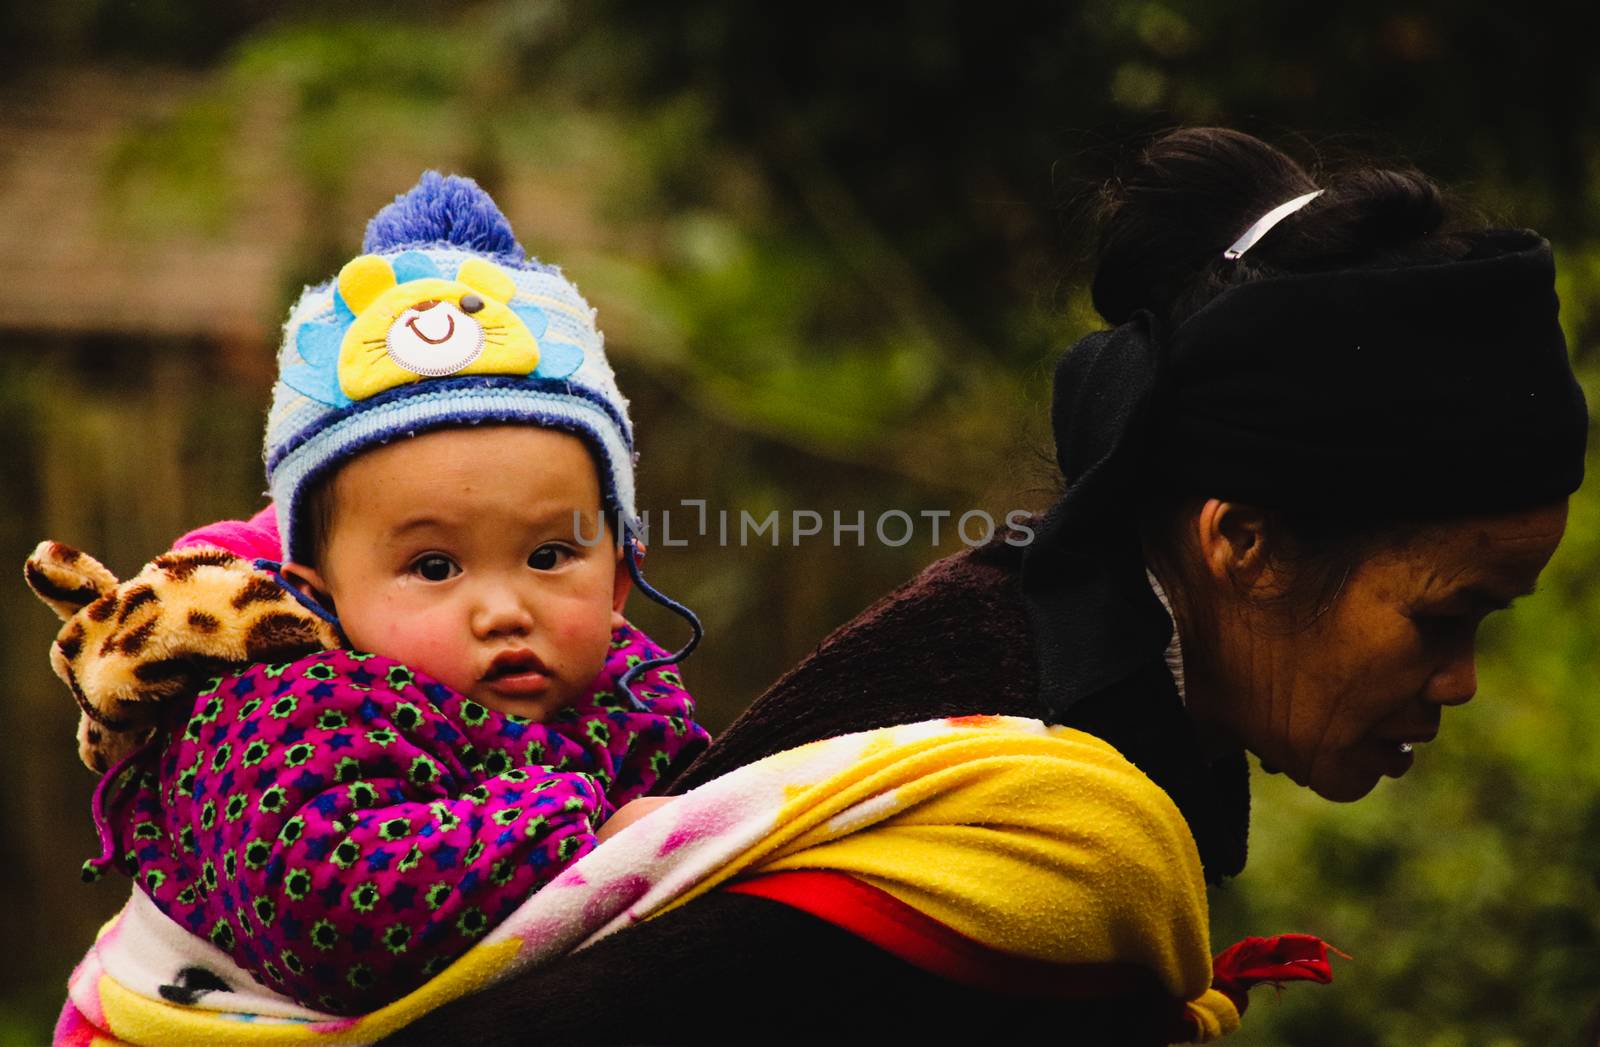 Editorial. A Hmong Woman Carrying a Baby by Sonnet15